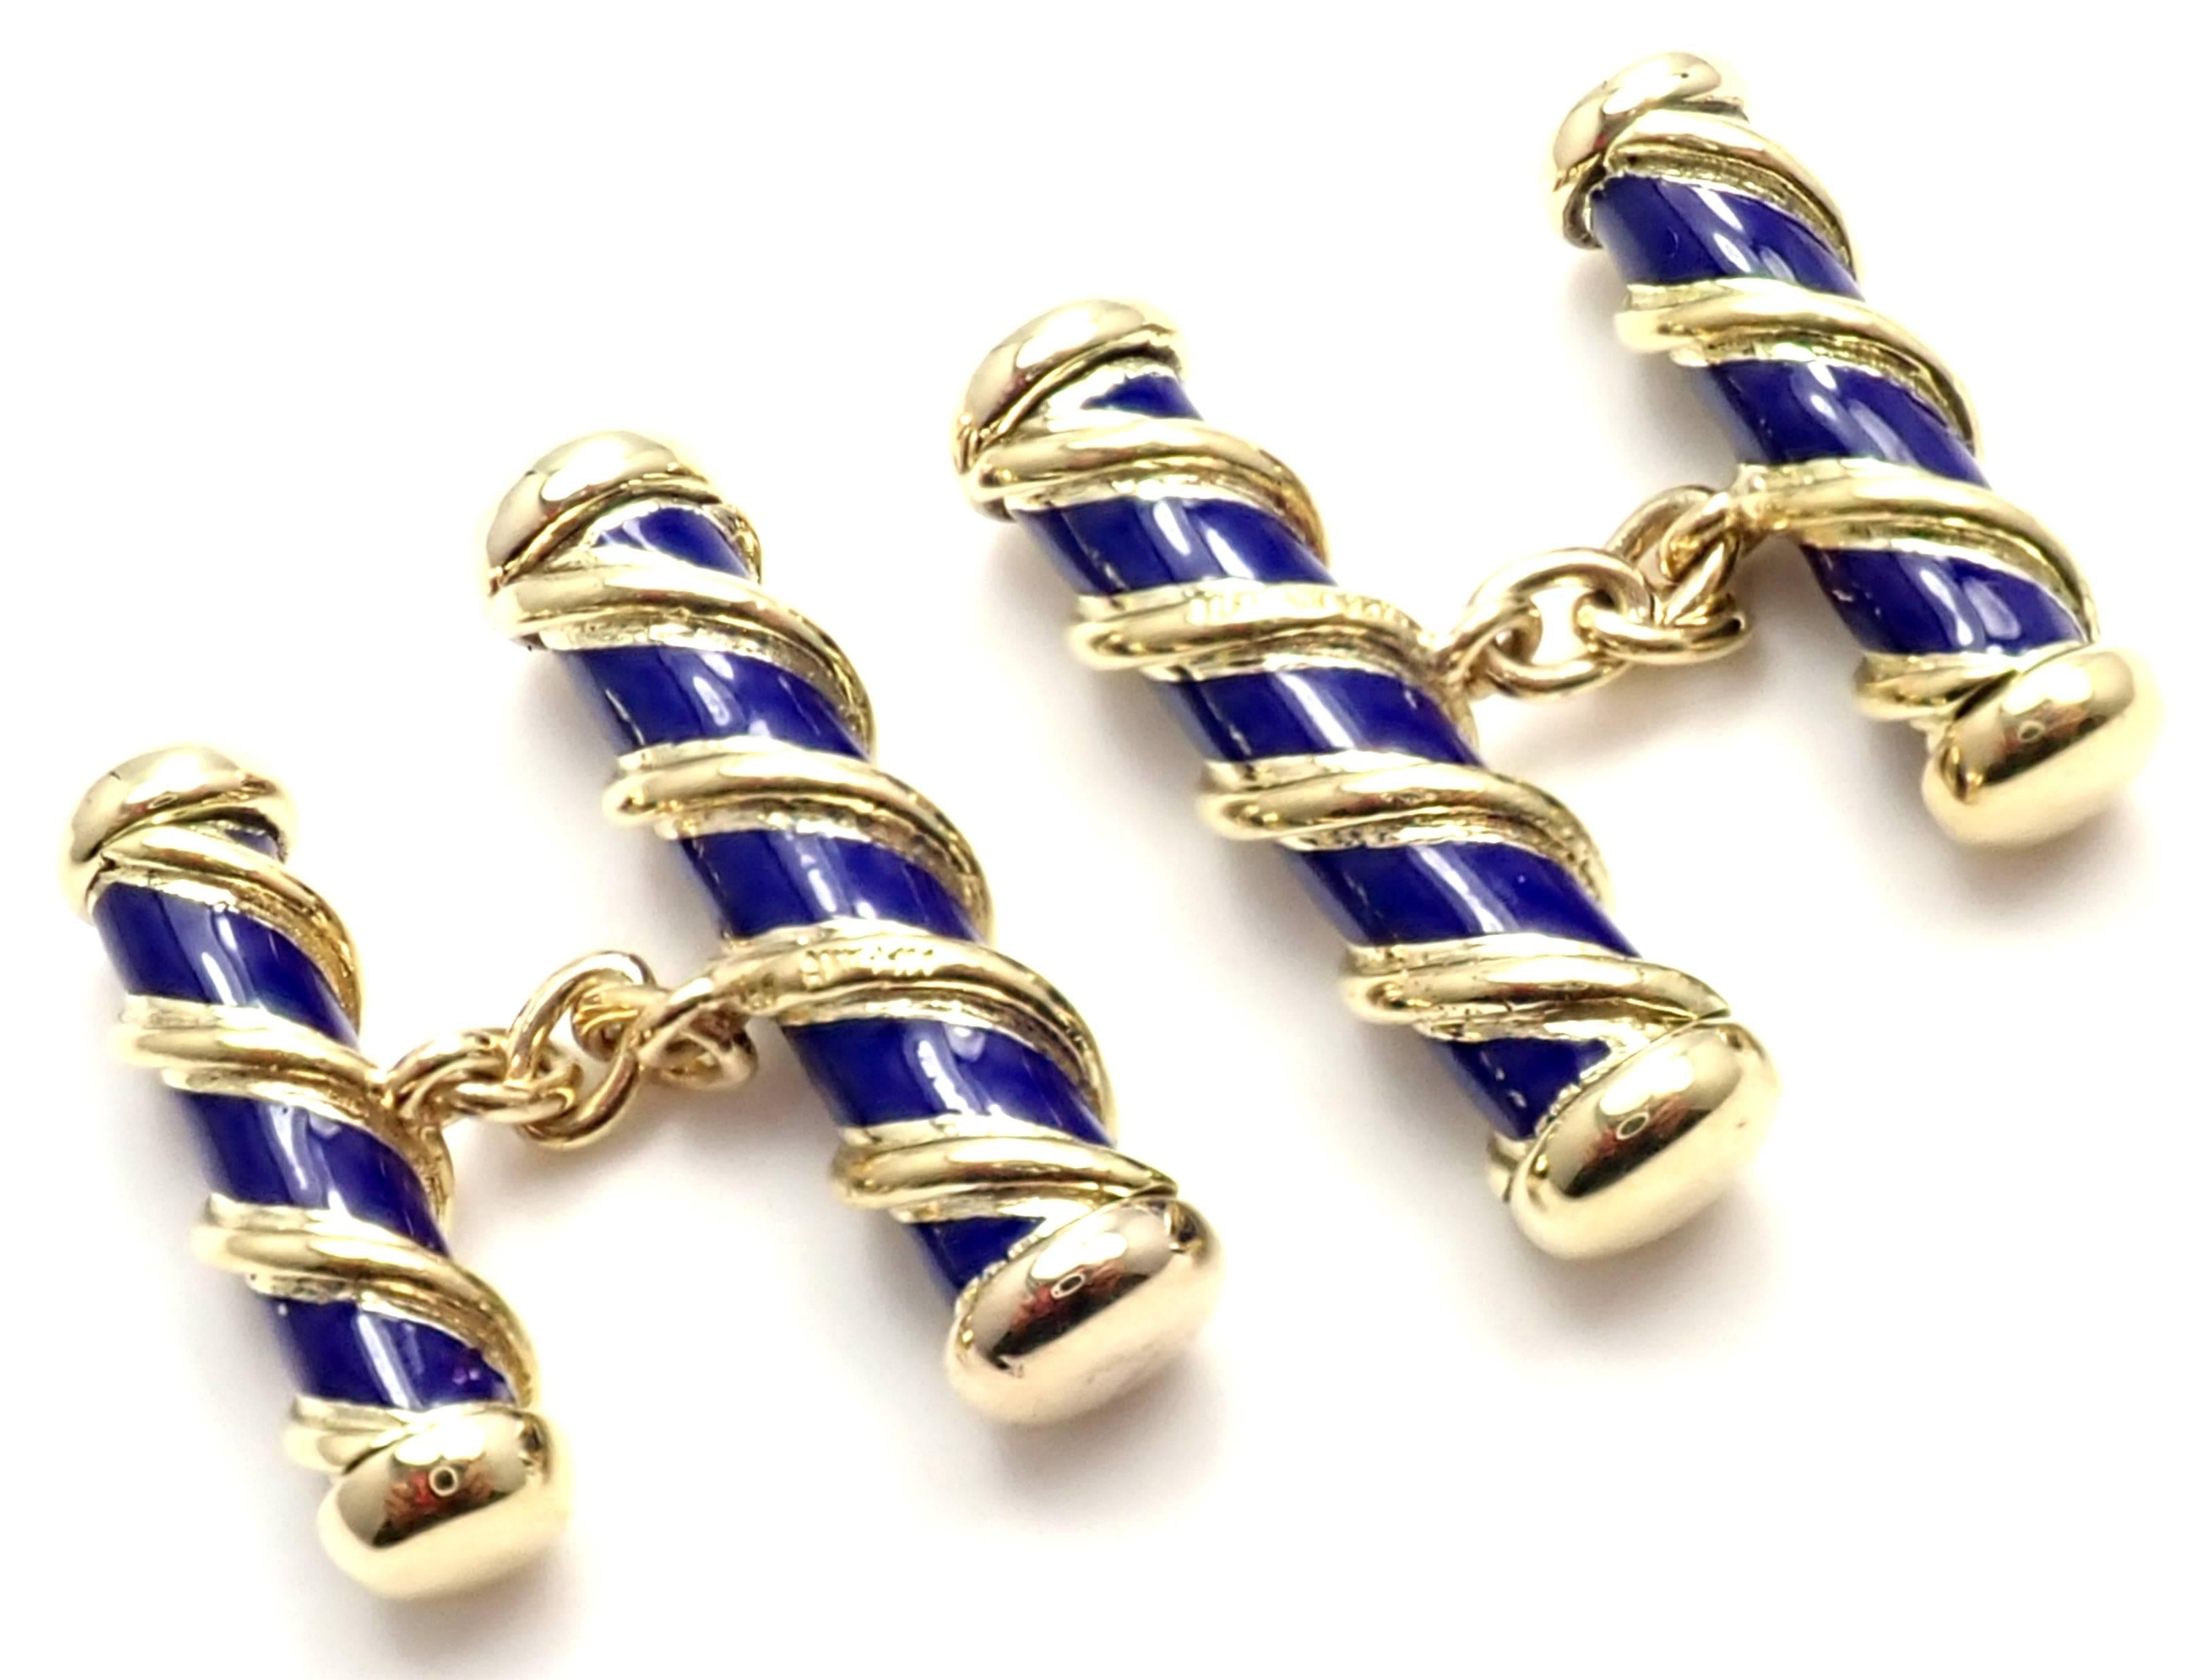 18k Yellow Gold Blue Enamel Cufflinks by Jean Schlumberger for Tiffany Co. 
Details: 
Measurements: 25mm x 20mm x 22mm
Weight: 17.8 grams
Stamped Hallmarks:  Tiffany Schlumberger 18k
*Free Shipping within the United States*
YOUR PRICE: